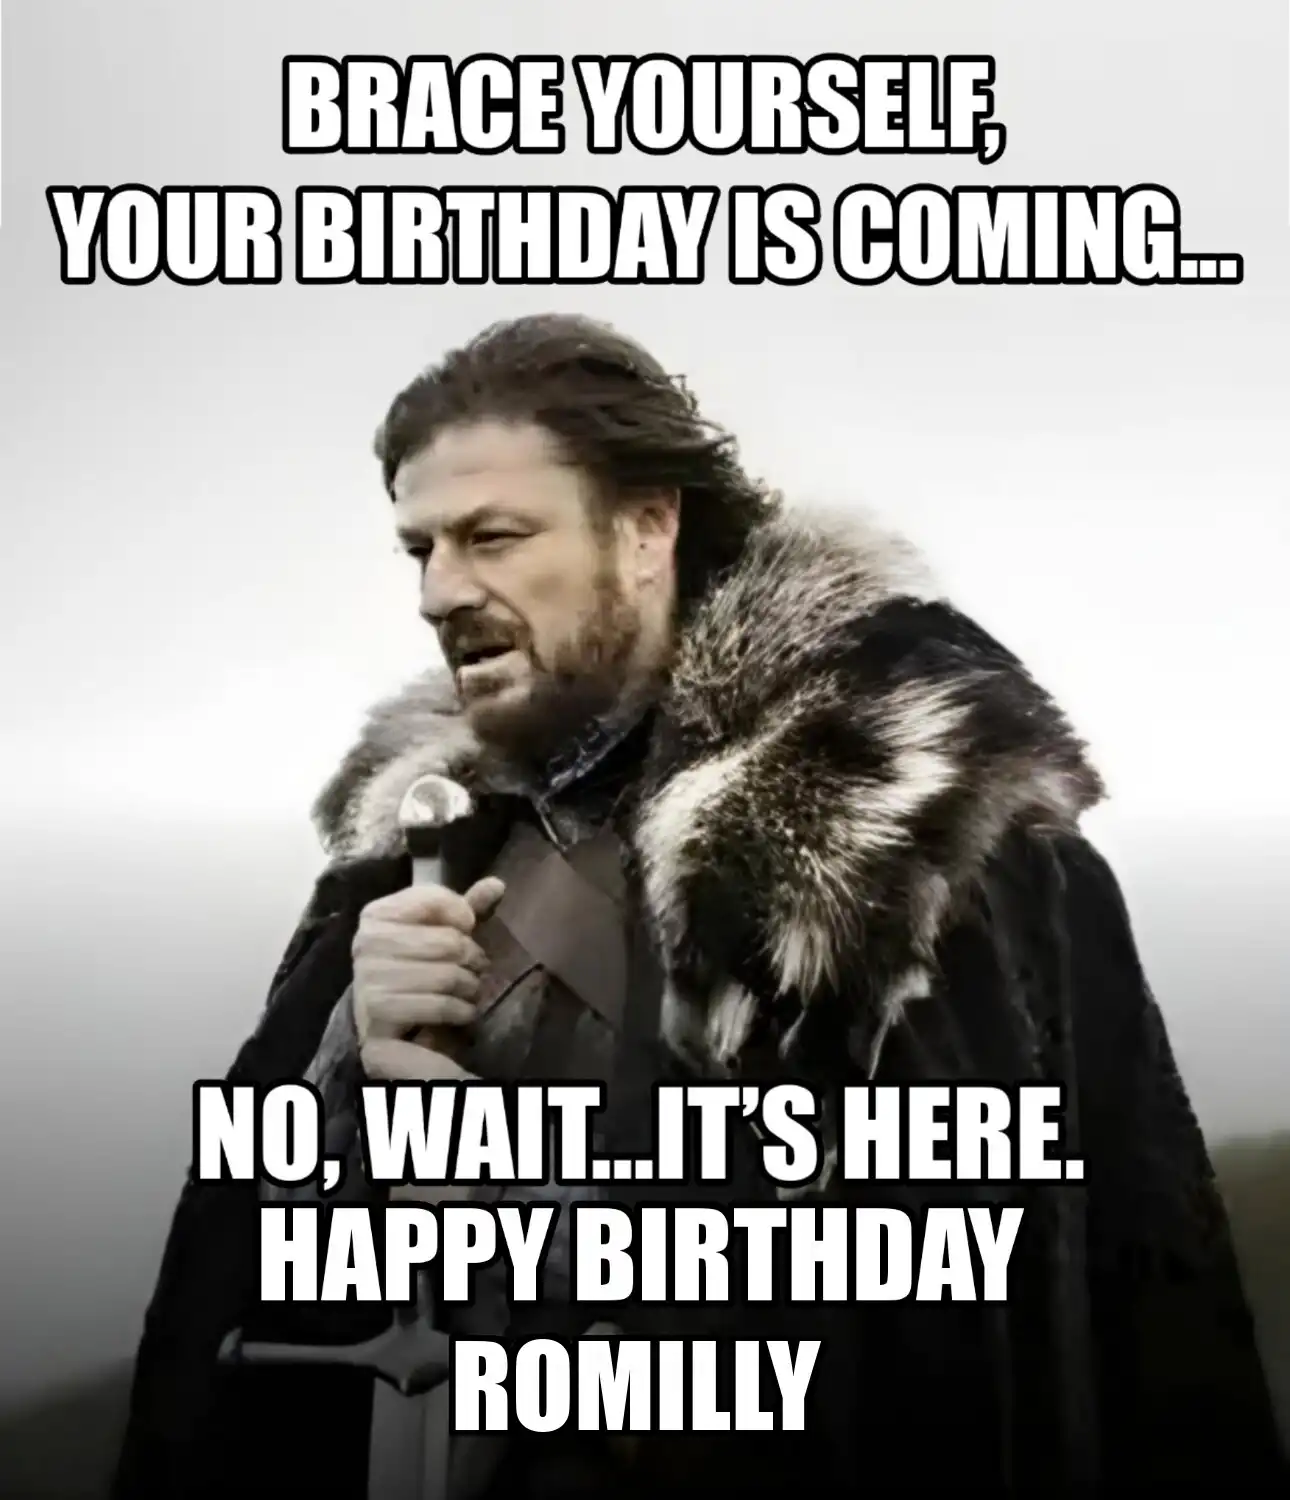 Happy Birthday Romilly Brace Yourself Your Birthday Is Coming Meme